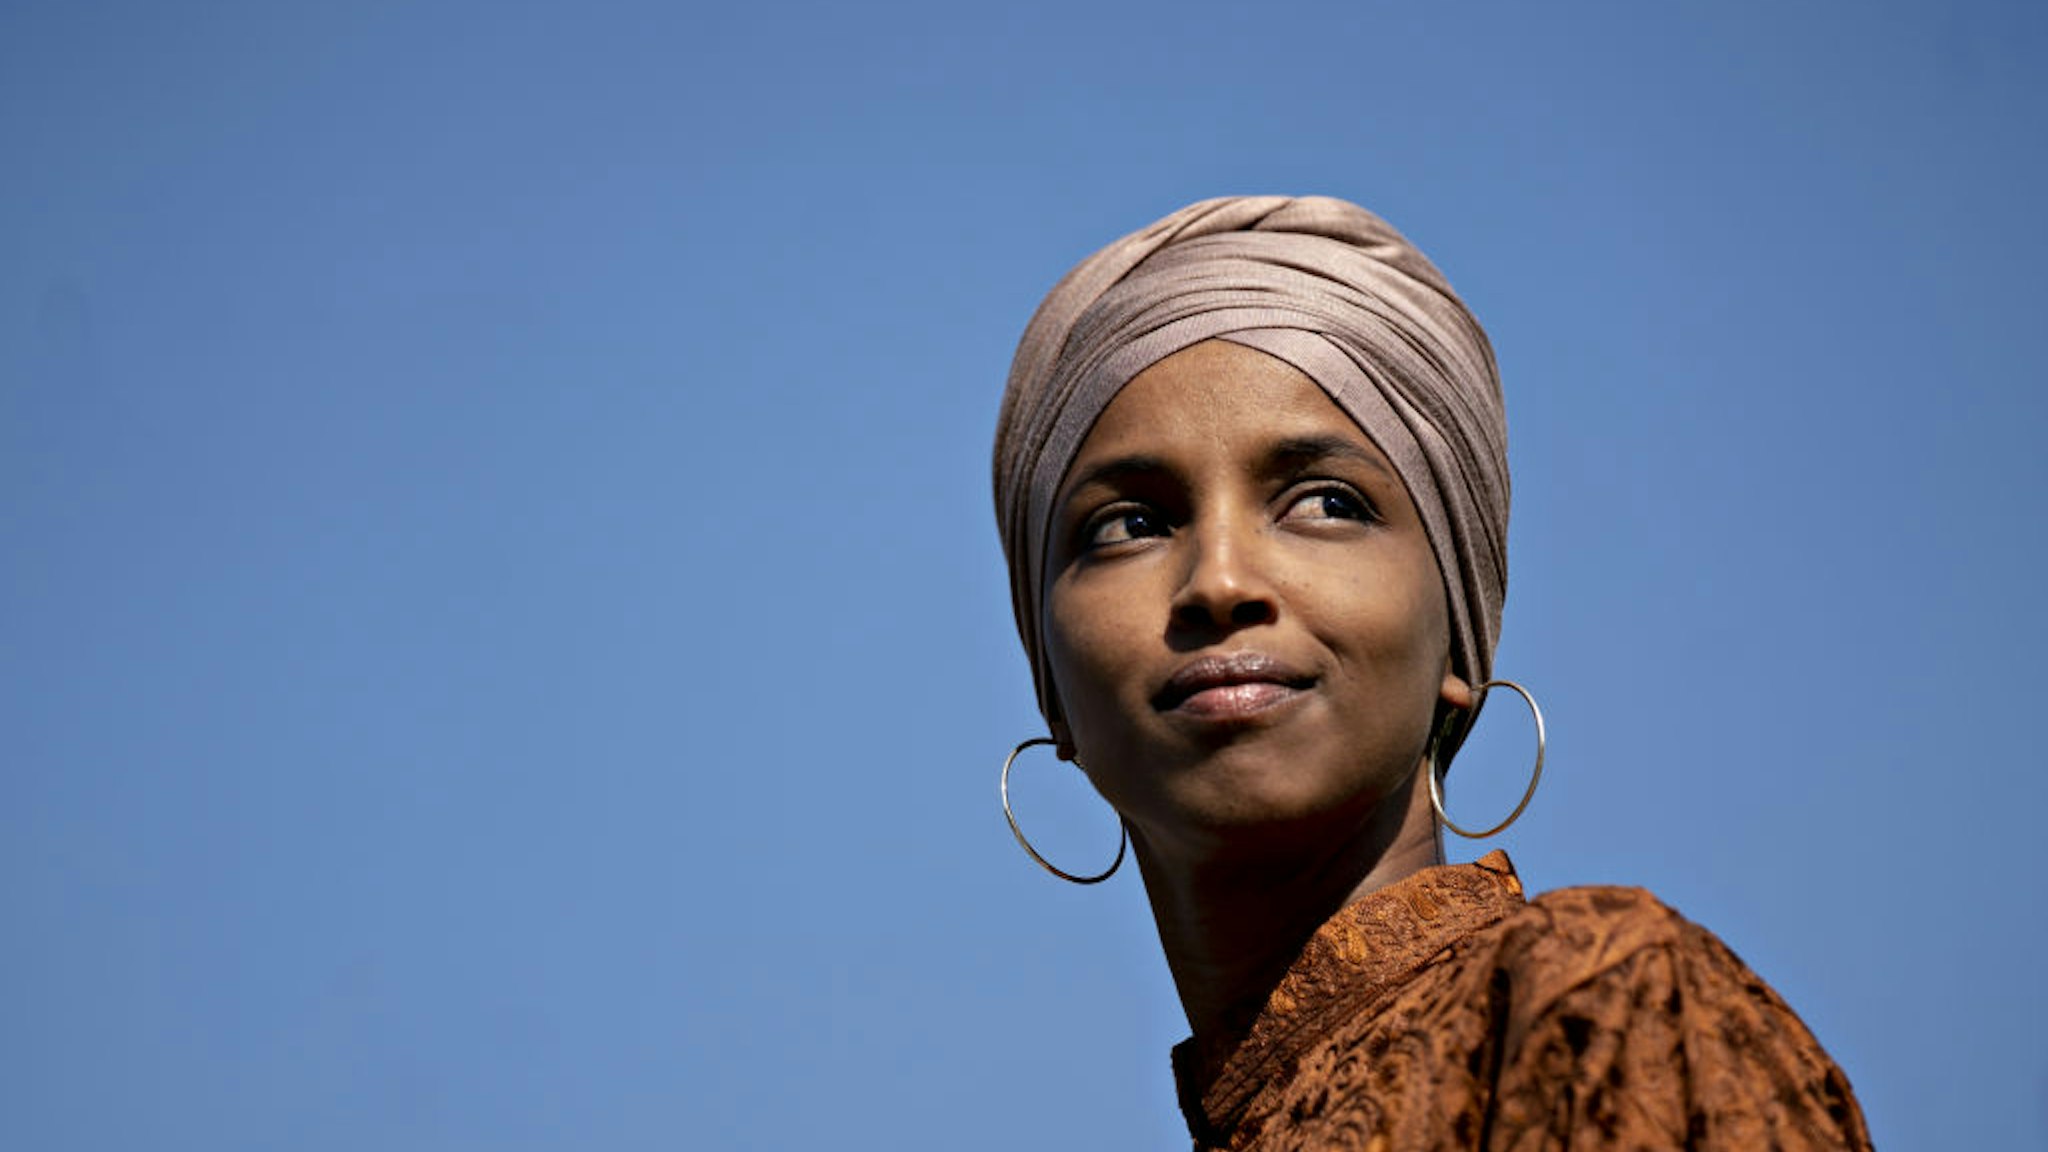 Ilhan Omar listens during a news conference on the Zero Waste Act